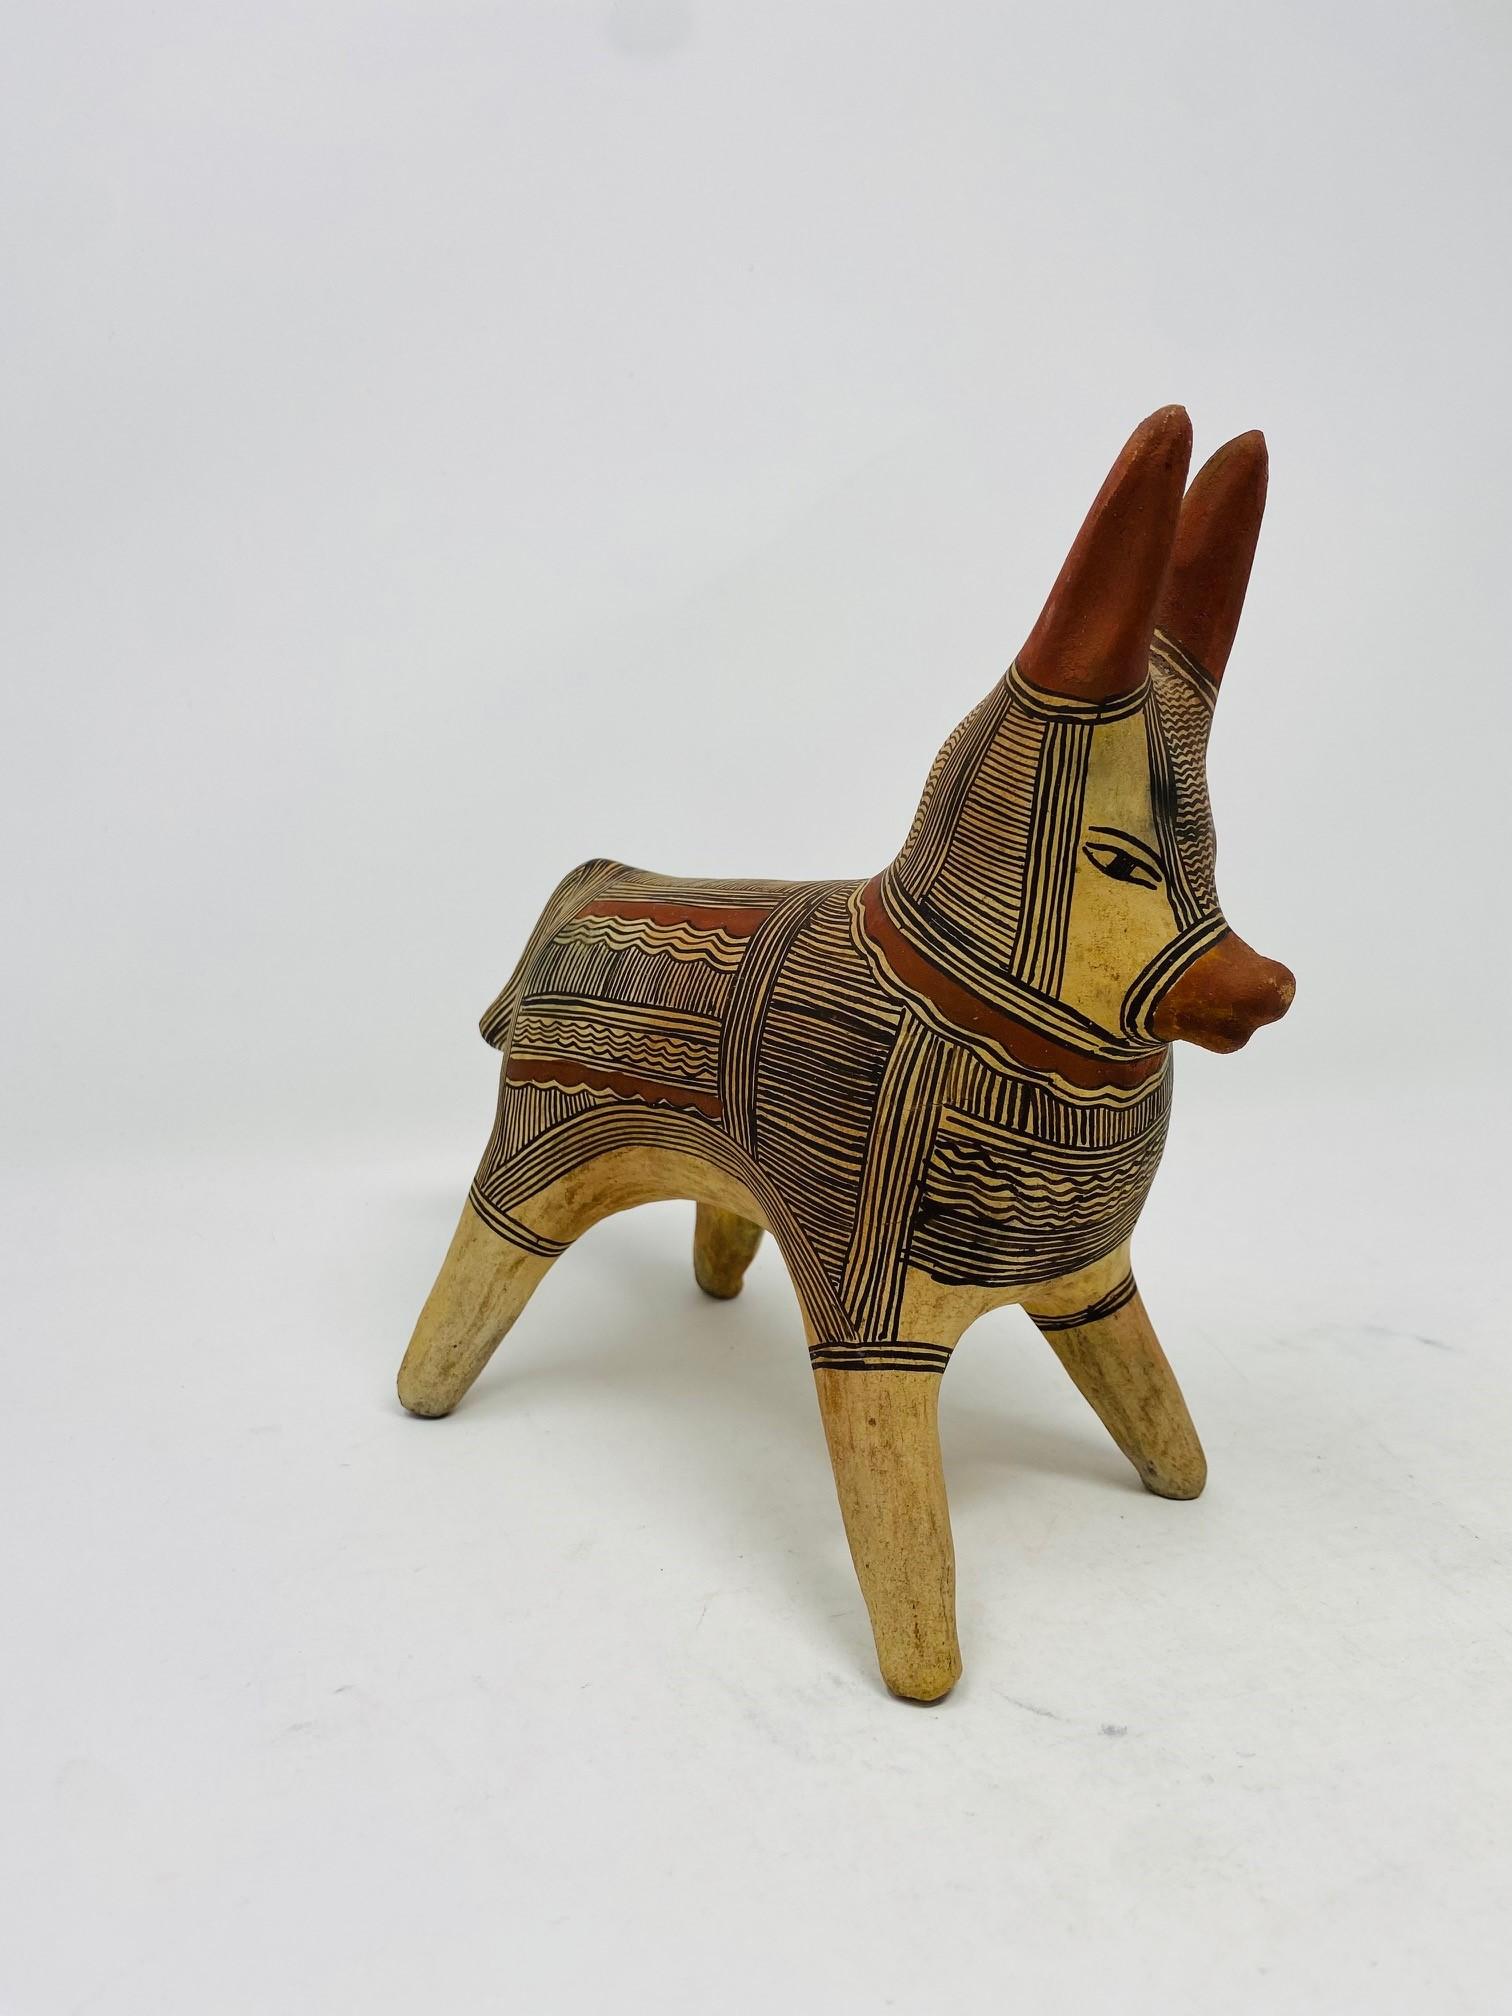 Incredibly charming and stylish pottery-clay donkey sculpture from Mexico.  This unique piece is its own one of a kind that shows craftmanship and style.  The sculpture presents the figure in a solid stance.  The figure is colored in a clay finish